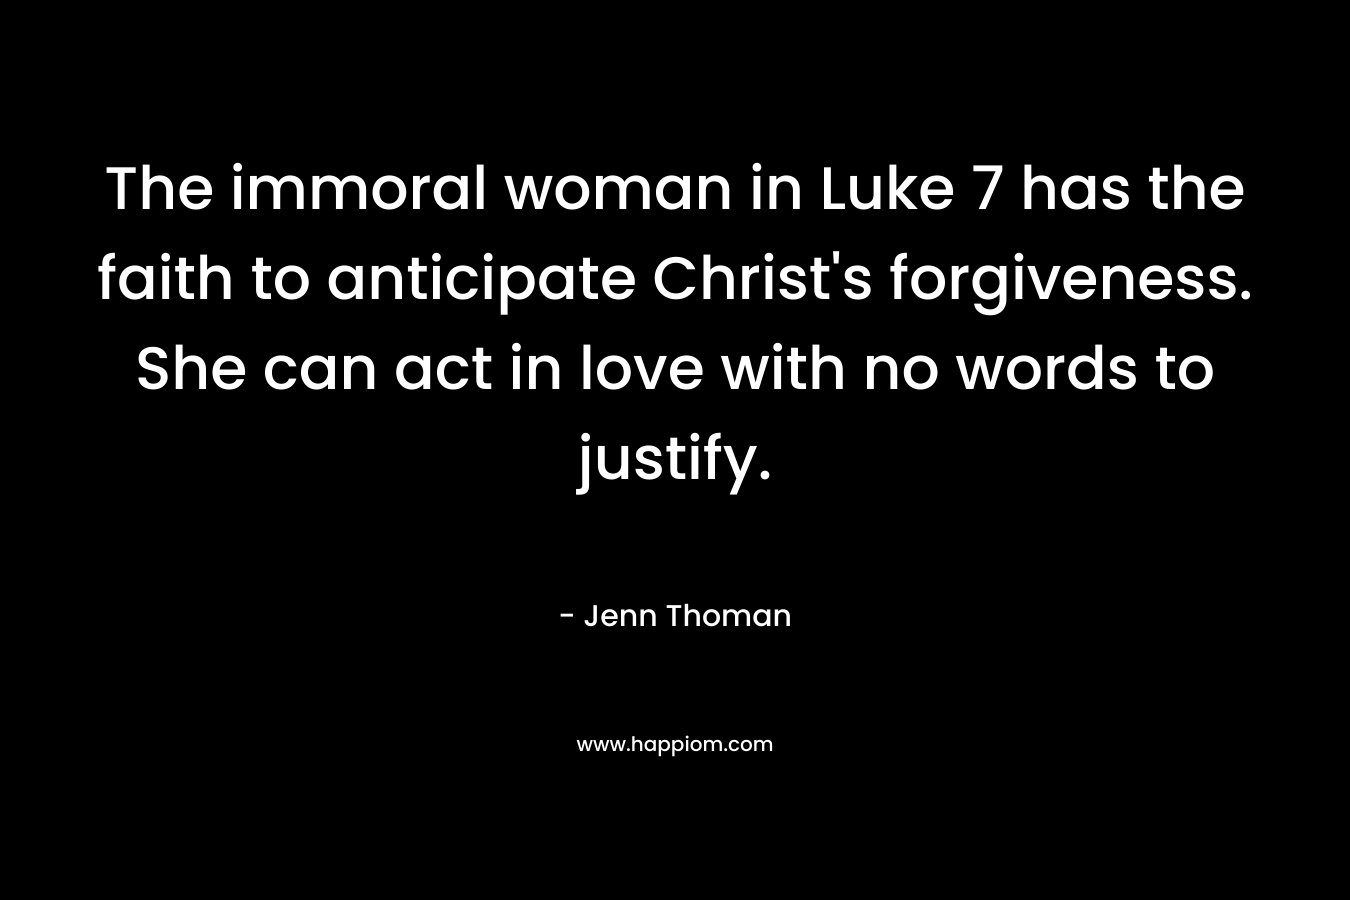 The immoral woman in Luke 7 has the faith to anticipate Christ’s forgiveness. She can act in love with no words to justify. – Jenn Thoman